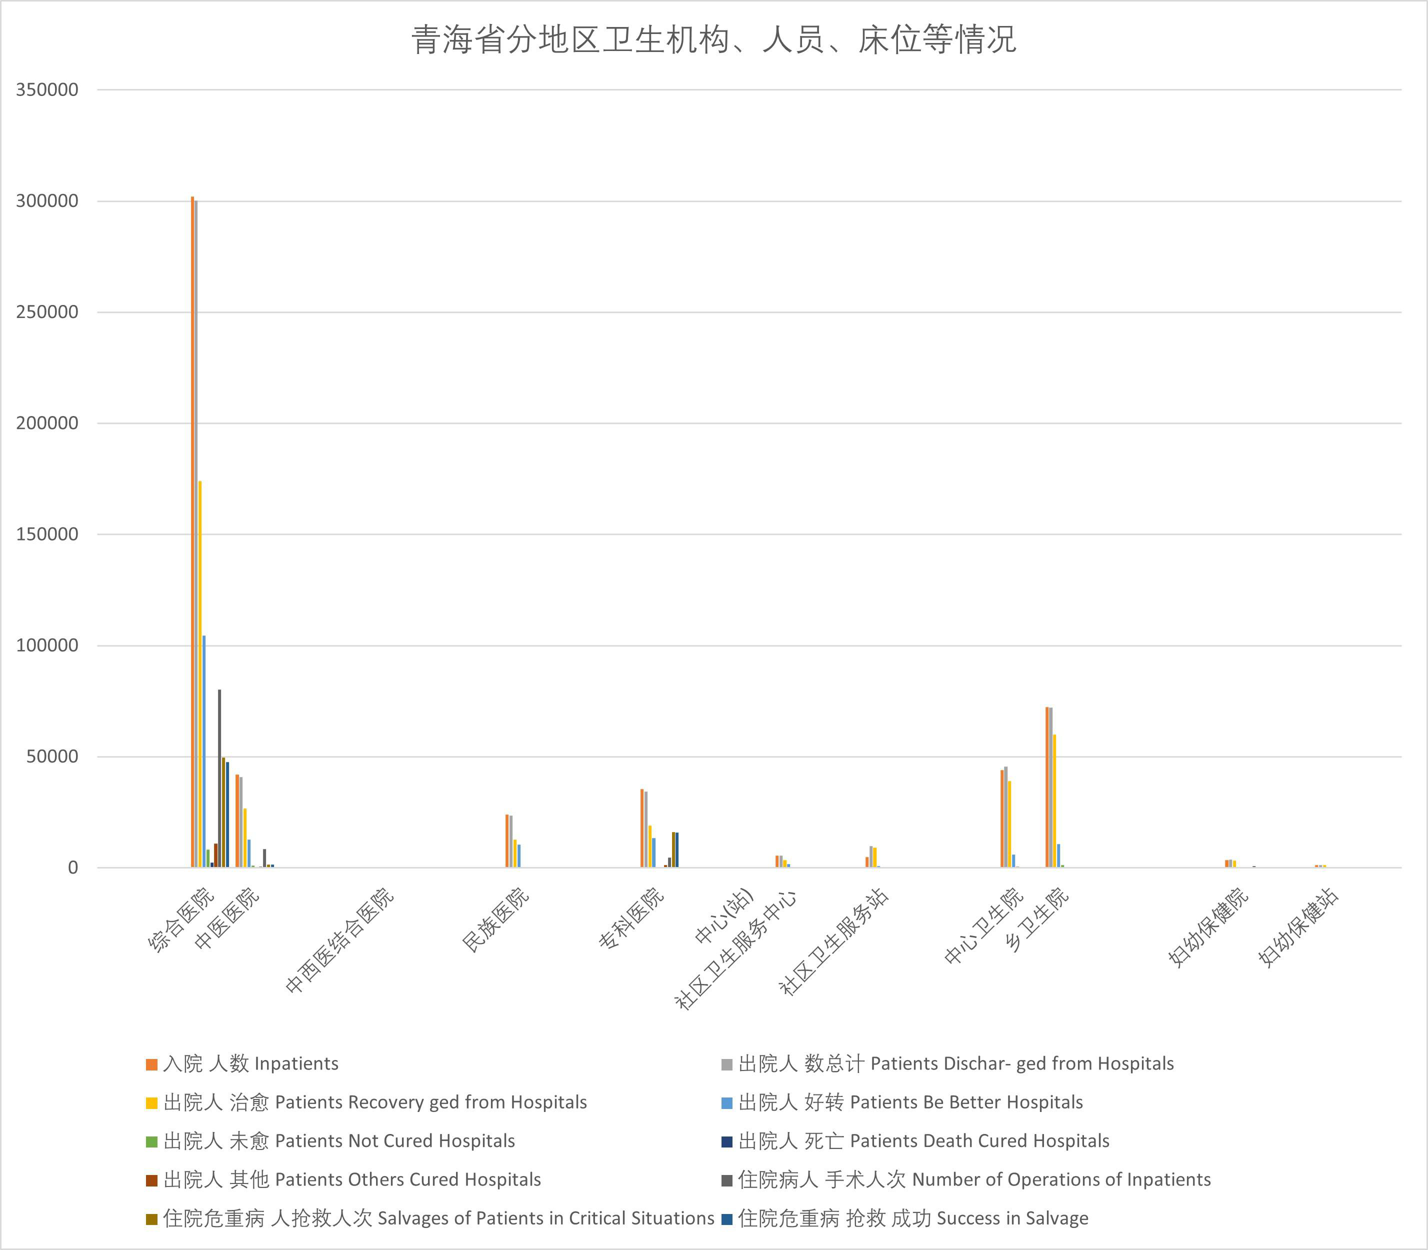 Health institutions, personnel and beds in different regions of Qinghai Province (1998-2011)